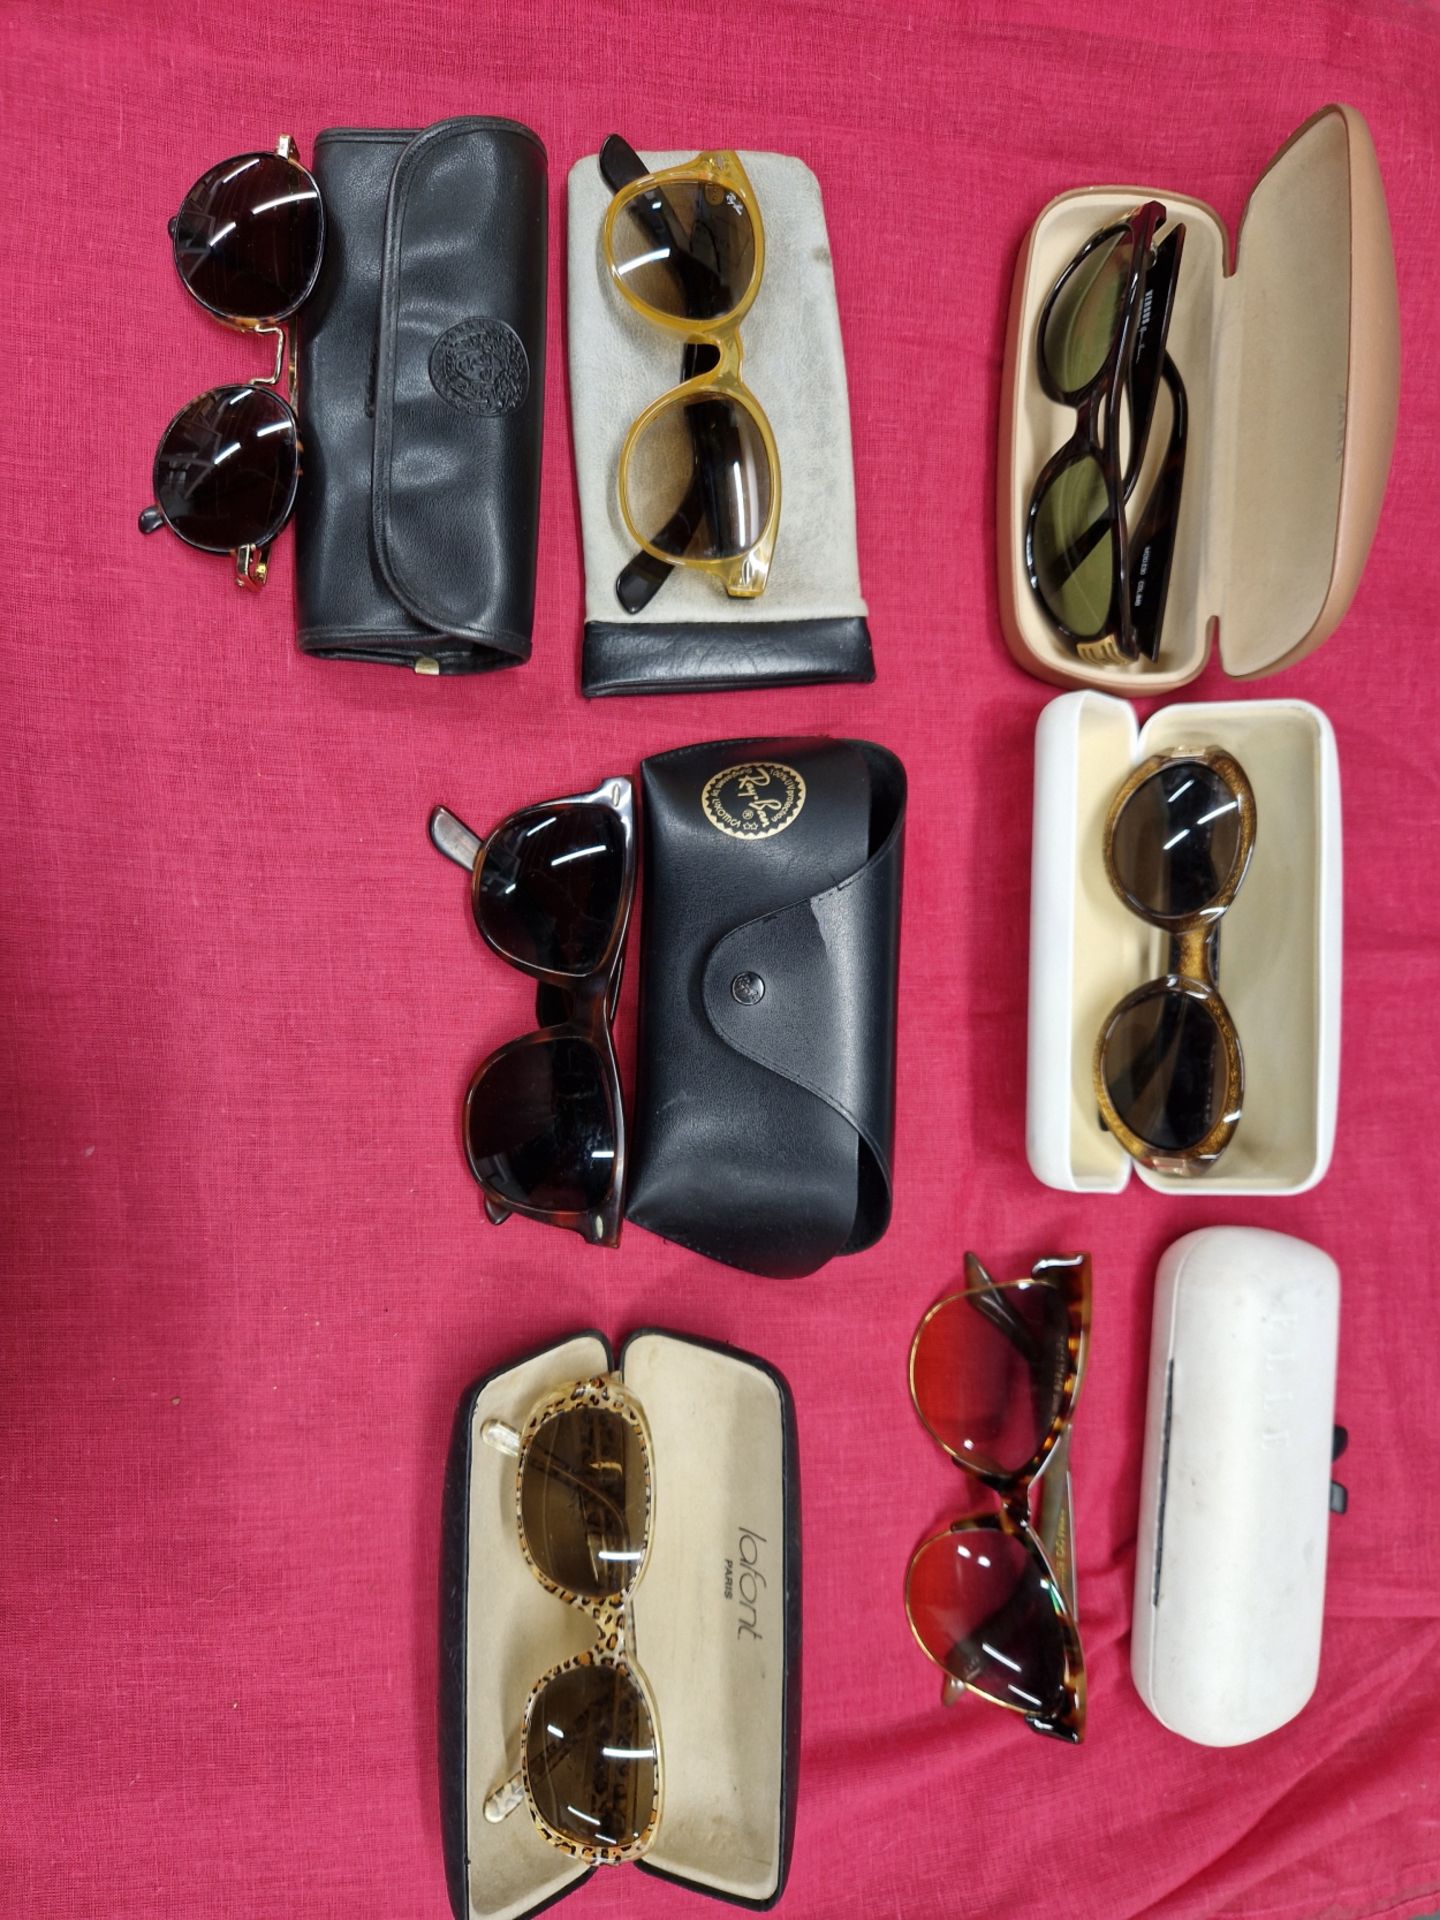 SUNGLASSES. A COLLECTION OF VARIOUS SUNGLASSES AND A MIXTURE OF VARIOUS CASES (NOT MATCHED)